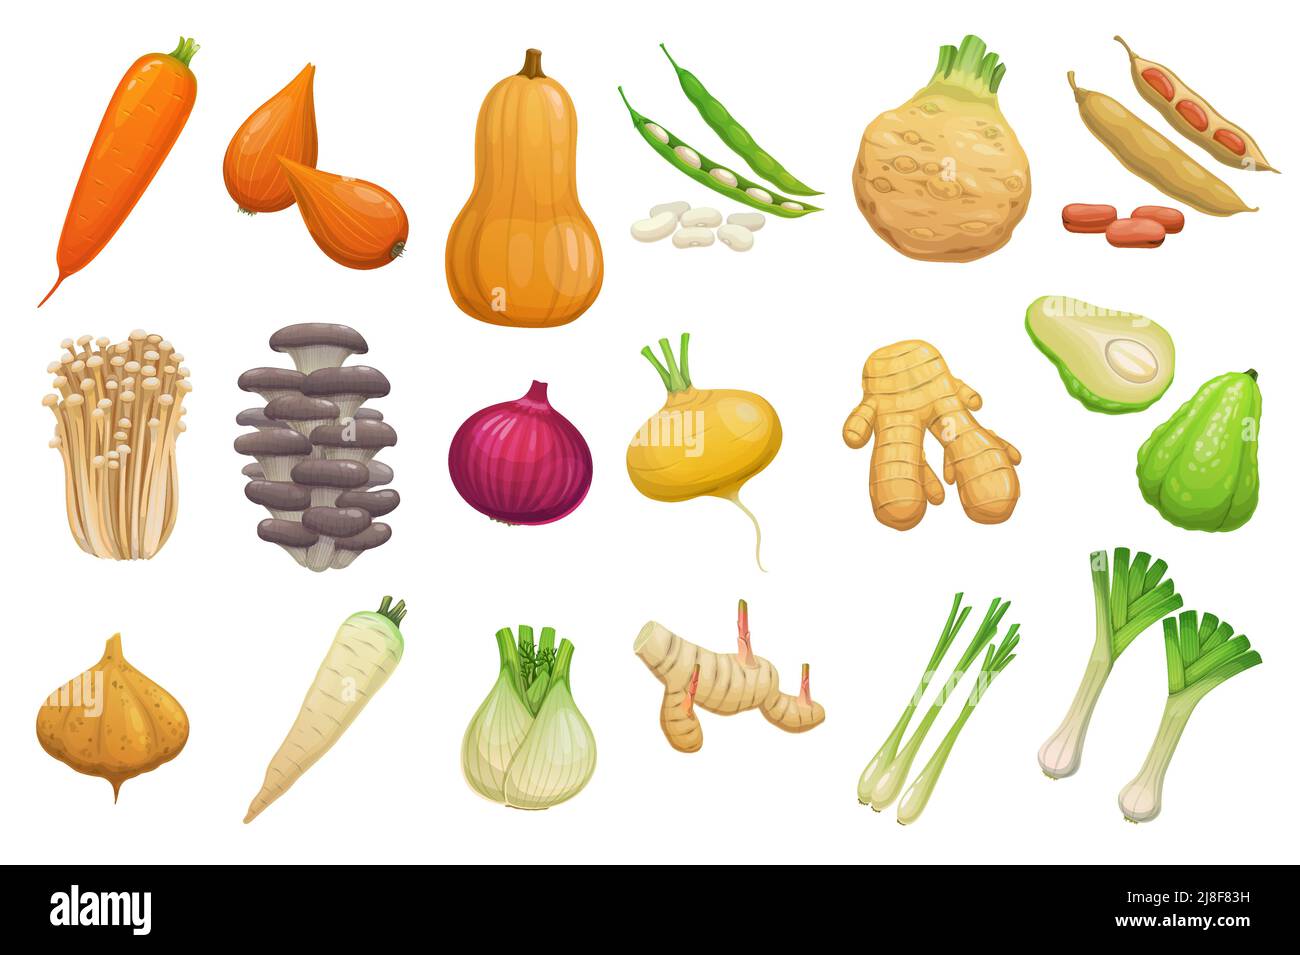 Cartoon vegetables, beans and mushrooms. Vector carrot, butternut pumpkin, shallots and celery tuber. Broad beans, enoki and oyster mushrooms, onion, ginger root and chayote or jicama with parsnips Stock Vector